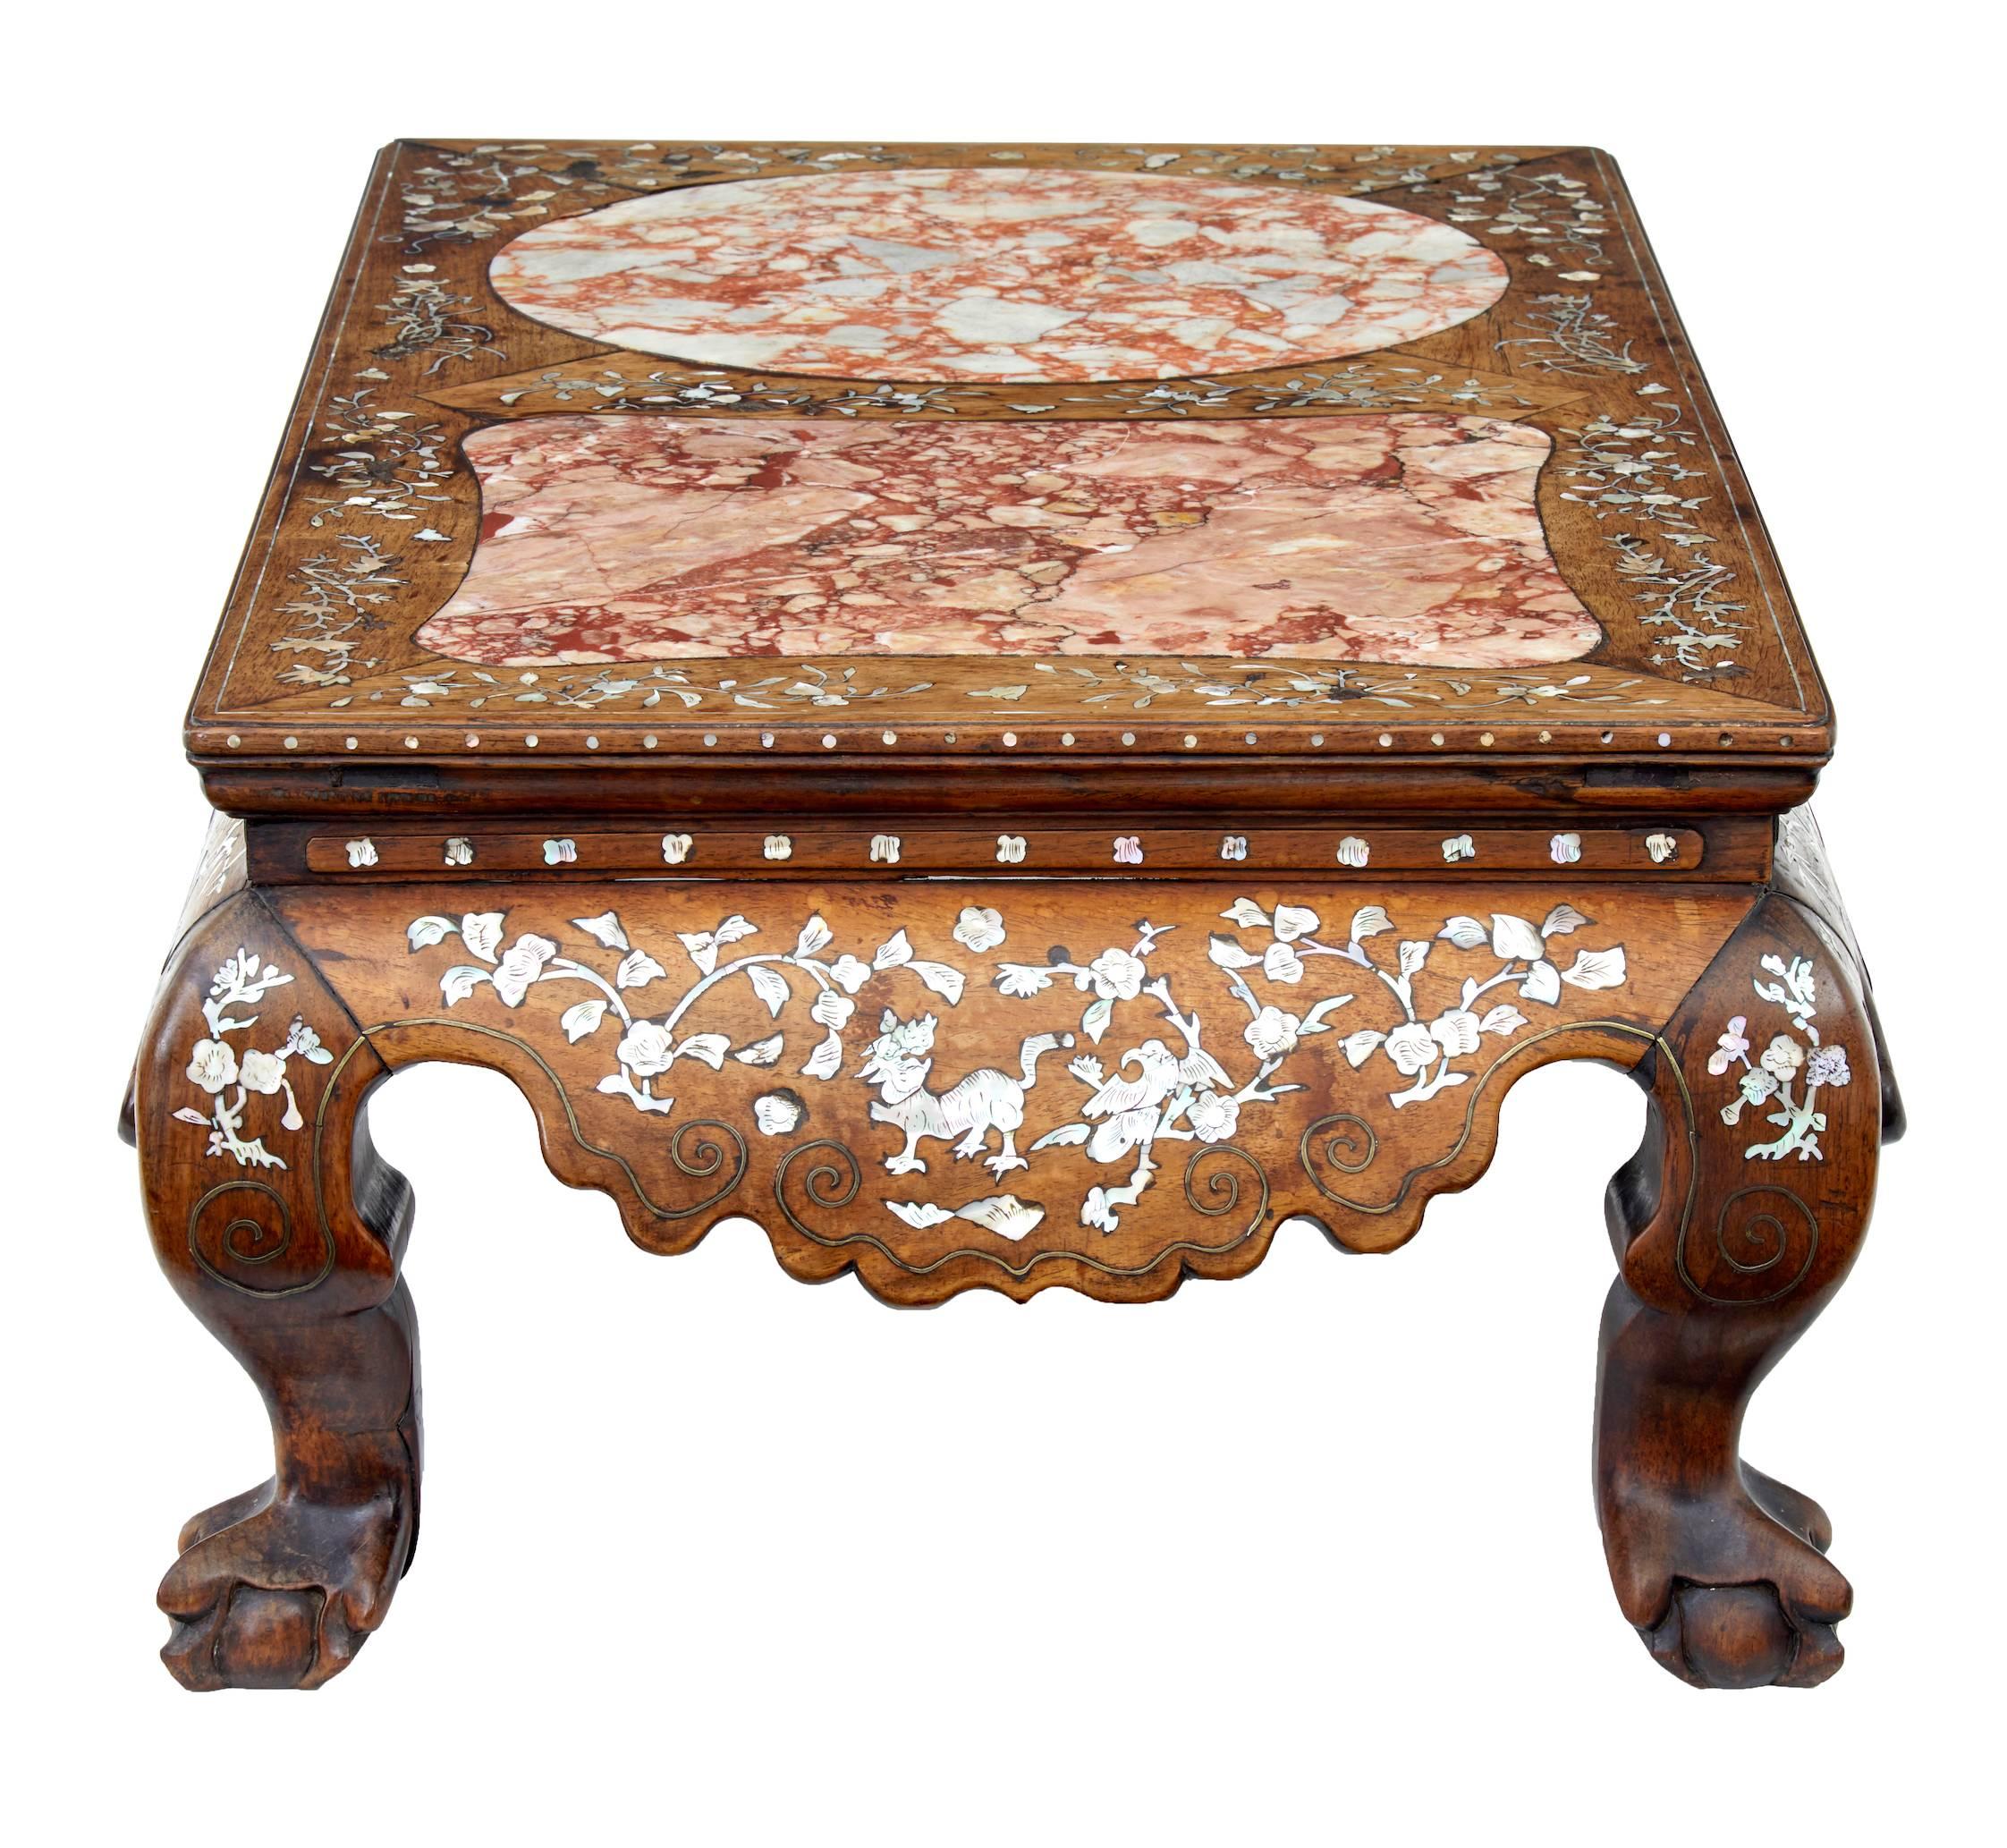 Mid Qing dynasty huanghuali inlaid Kang table, circa 1780.
Given the marble inserts we believe this table was used for dining purposes.
Profusely inlaid with mother-of-pearl rams, dogs and birds and surrounded by patterned florals.
Further inlaid